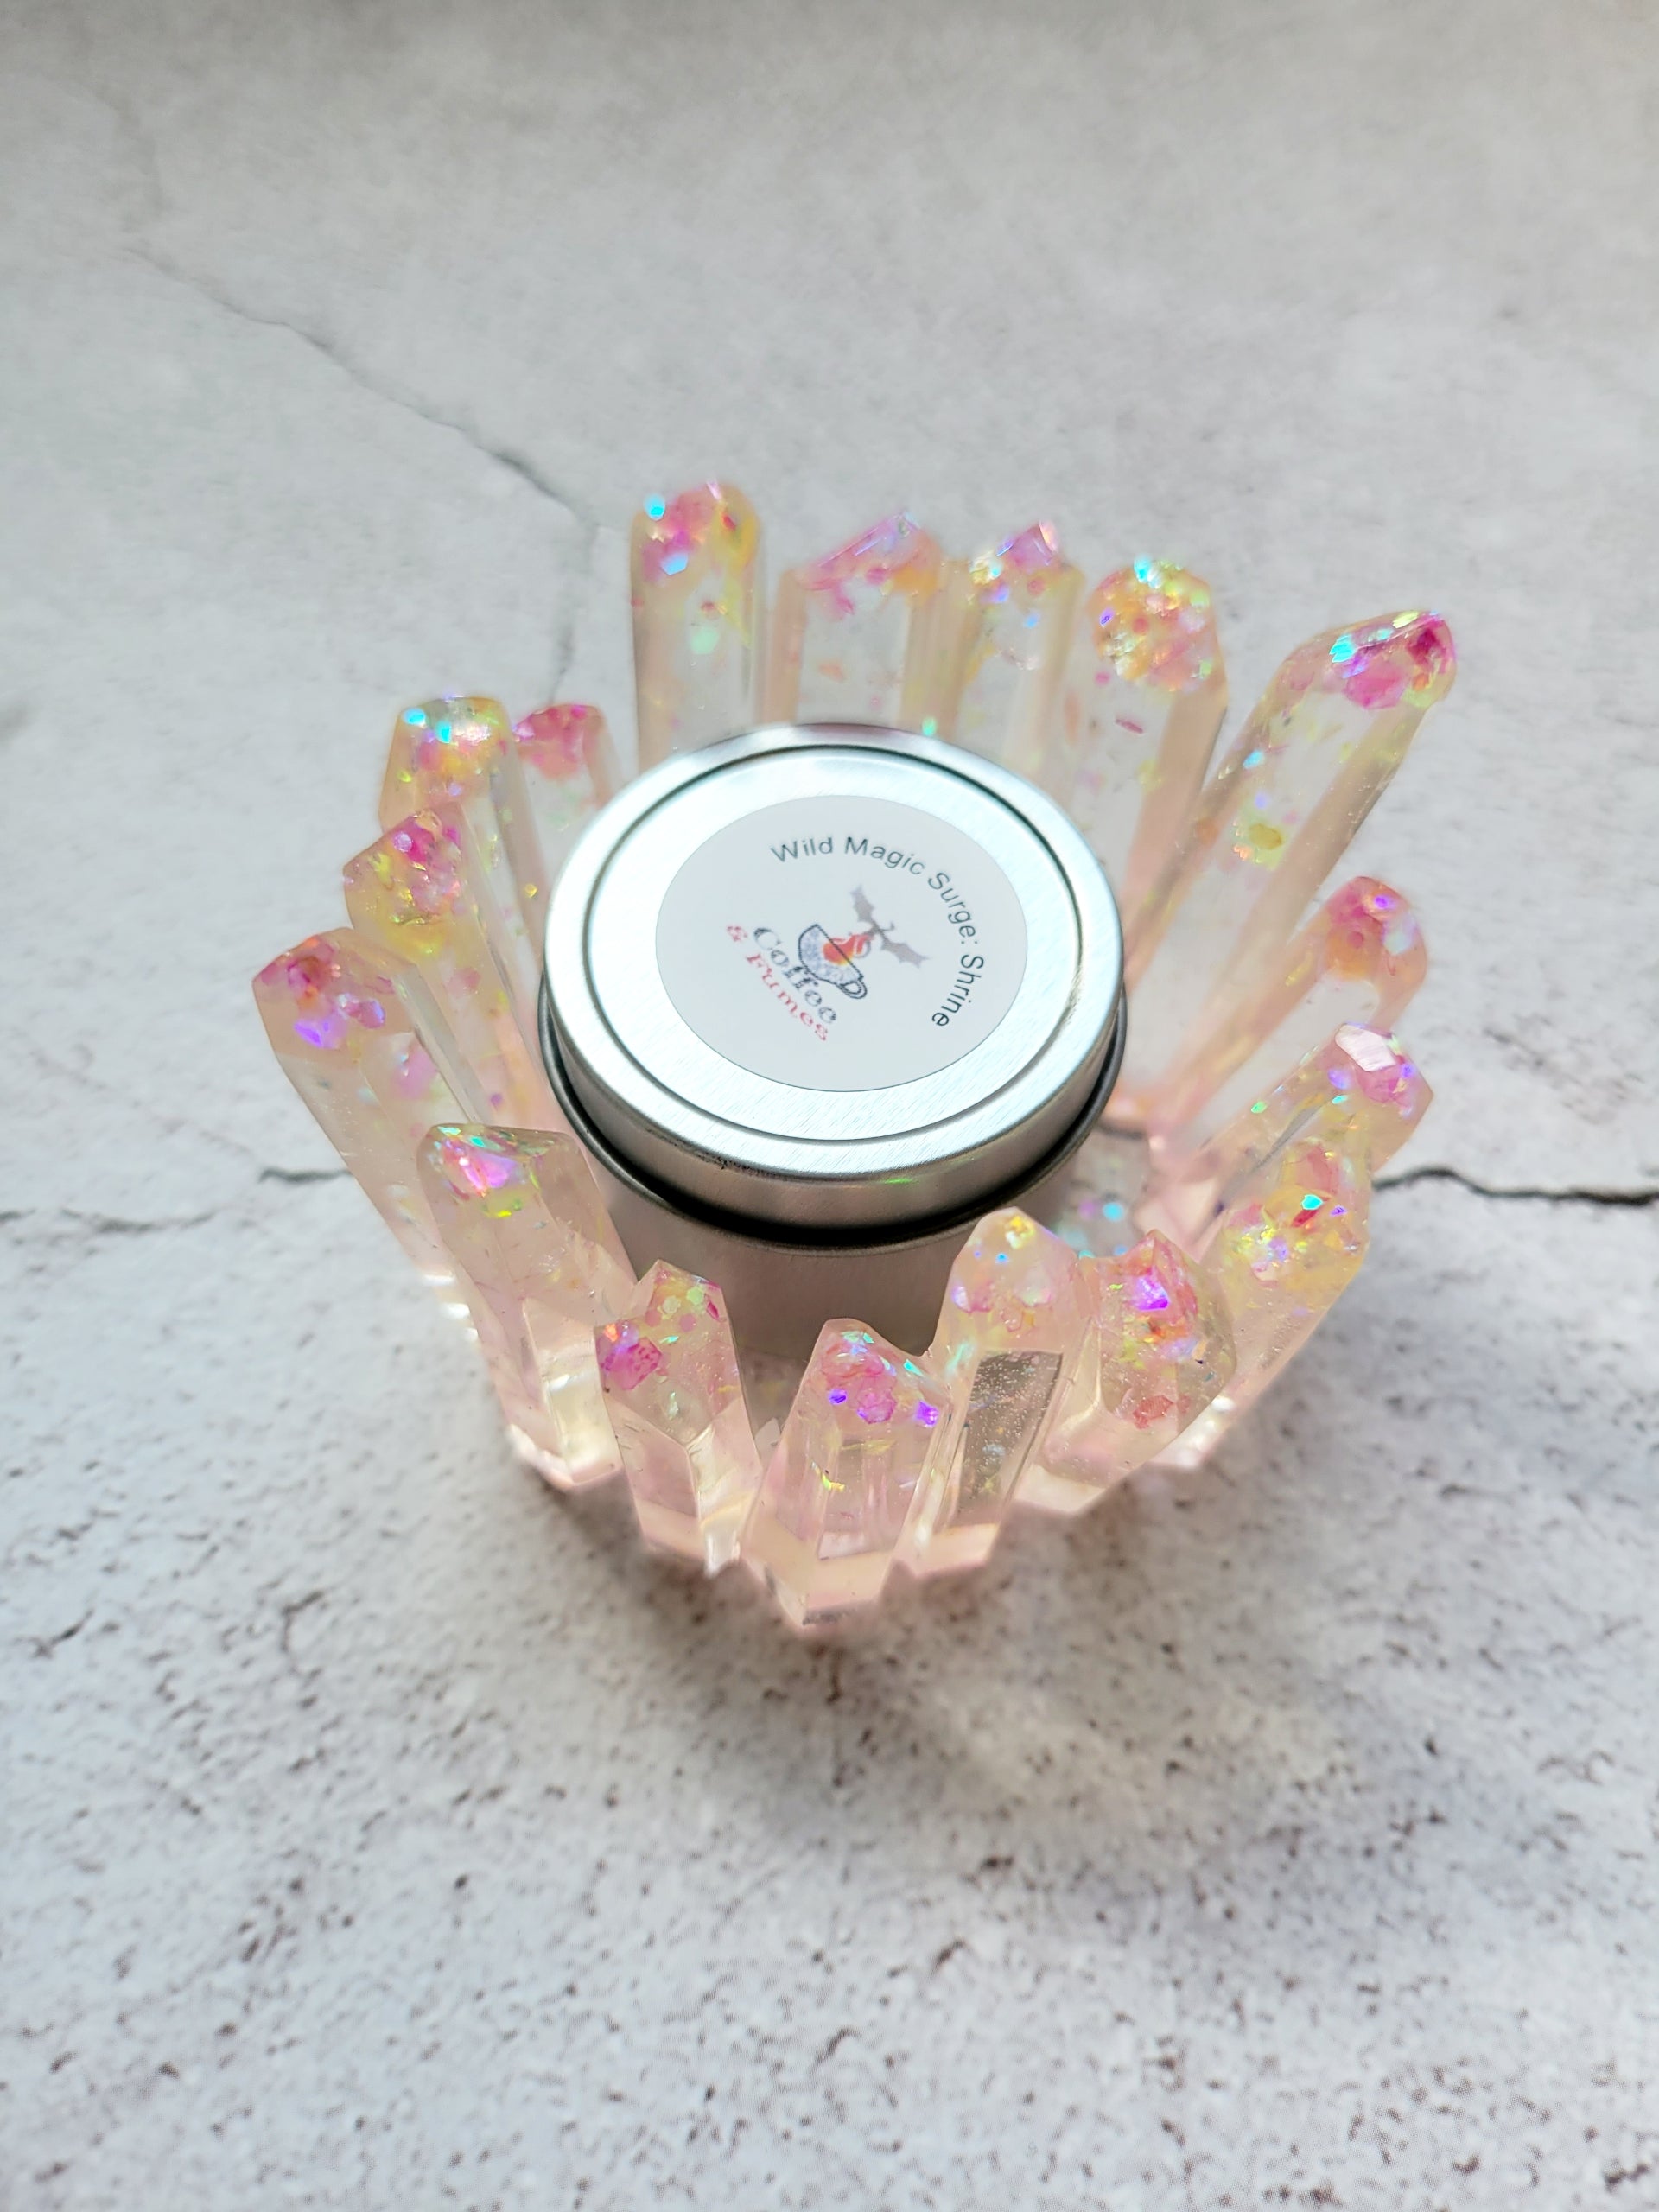 A side birds eye view of a tealight candle holder in the style of a cluster of crystals forming a circle. It's translucent clear with pink and yellow glitter. The crystals are various heights. There is a tealight candle inside to show size comparison.